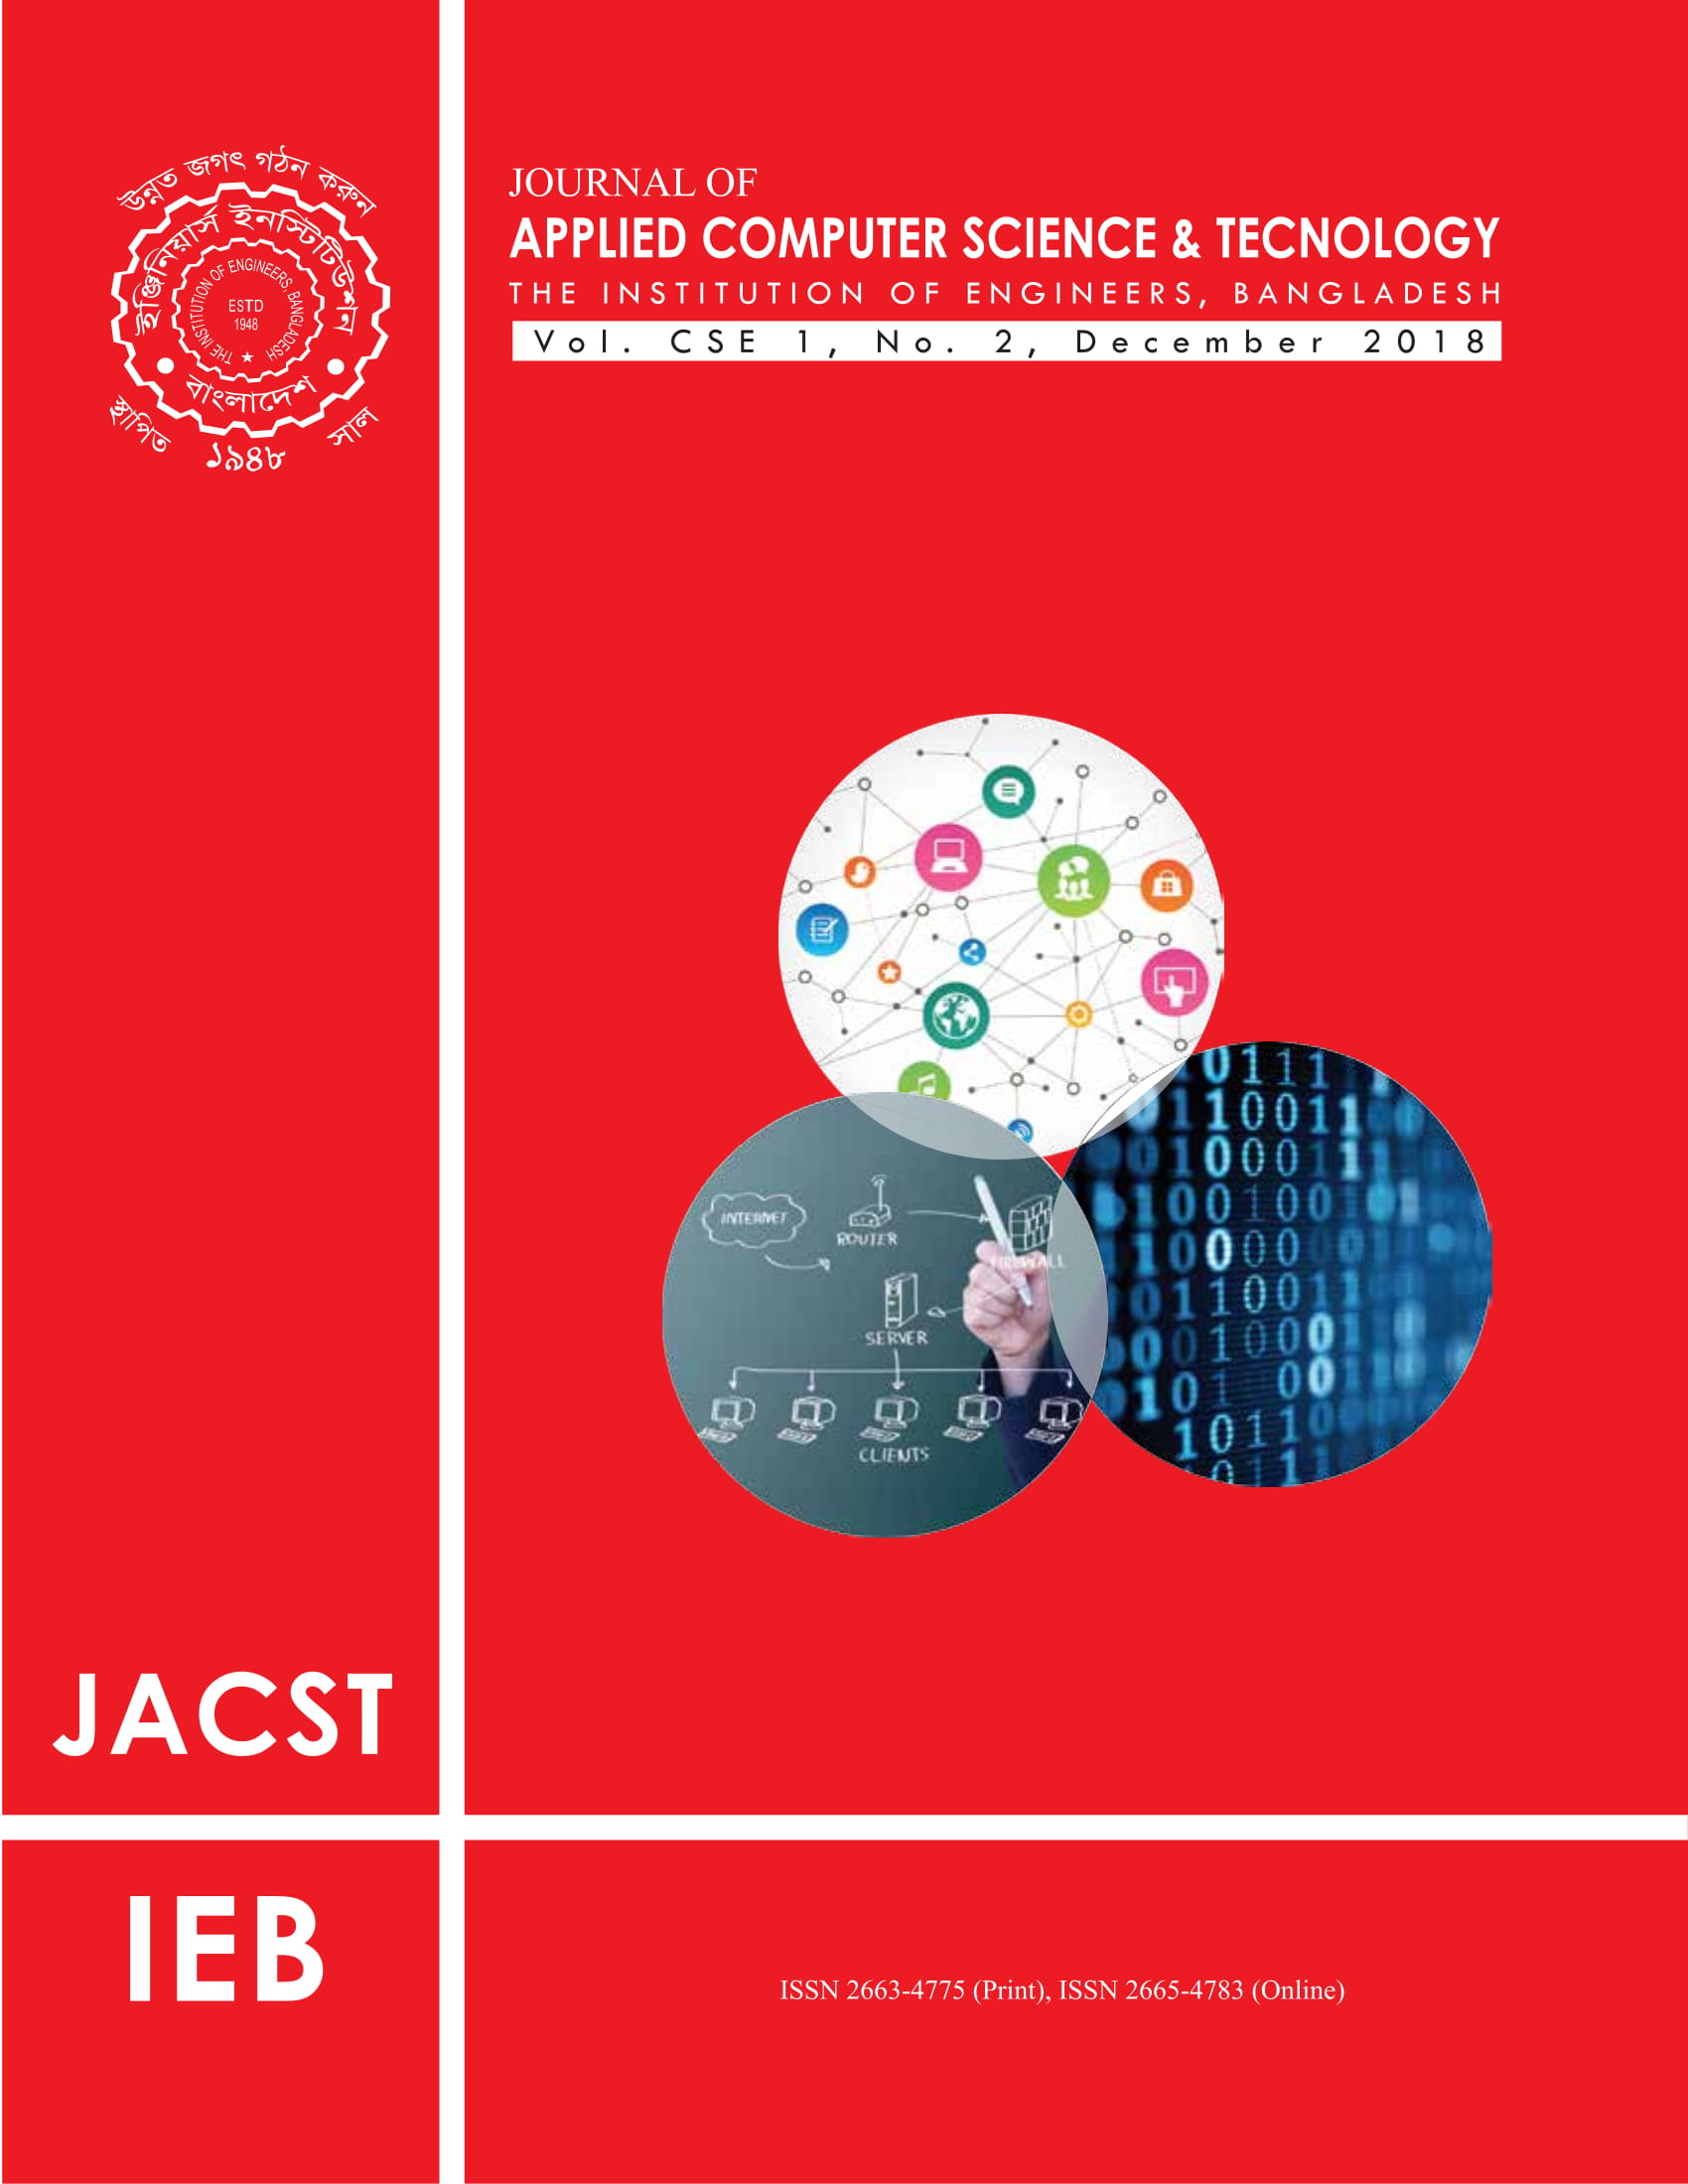 Journal of Applied Computer Science & Technology Vol 1, CSE 1, No. 2, December 2018